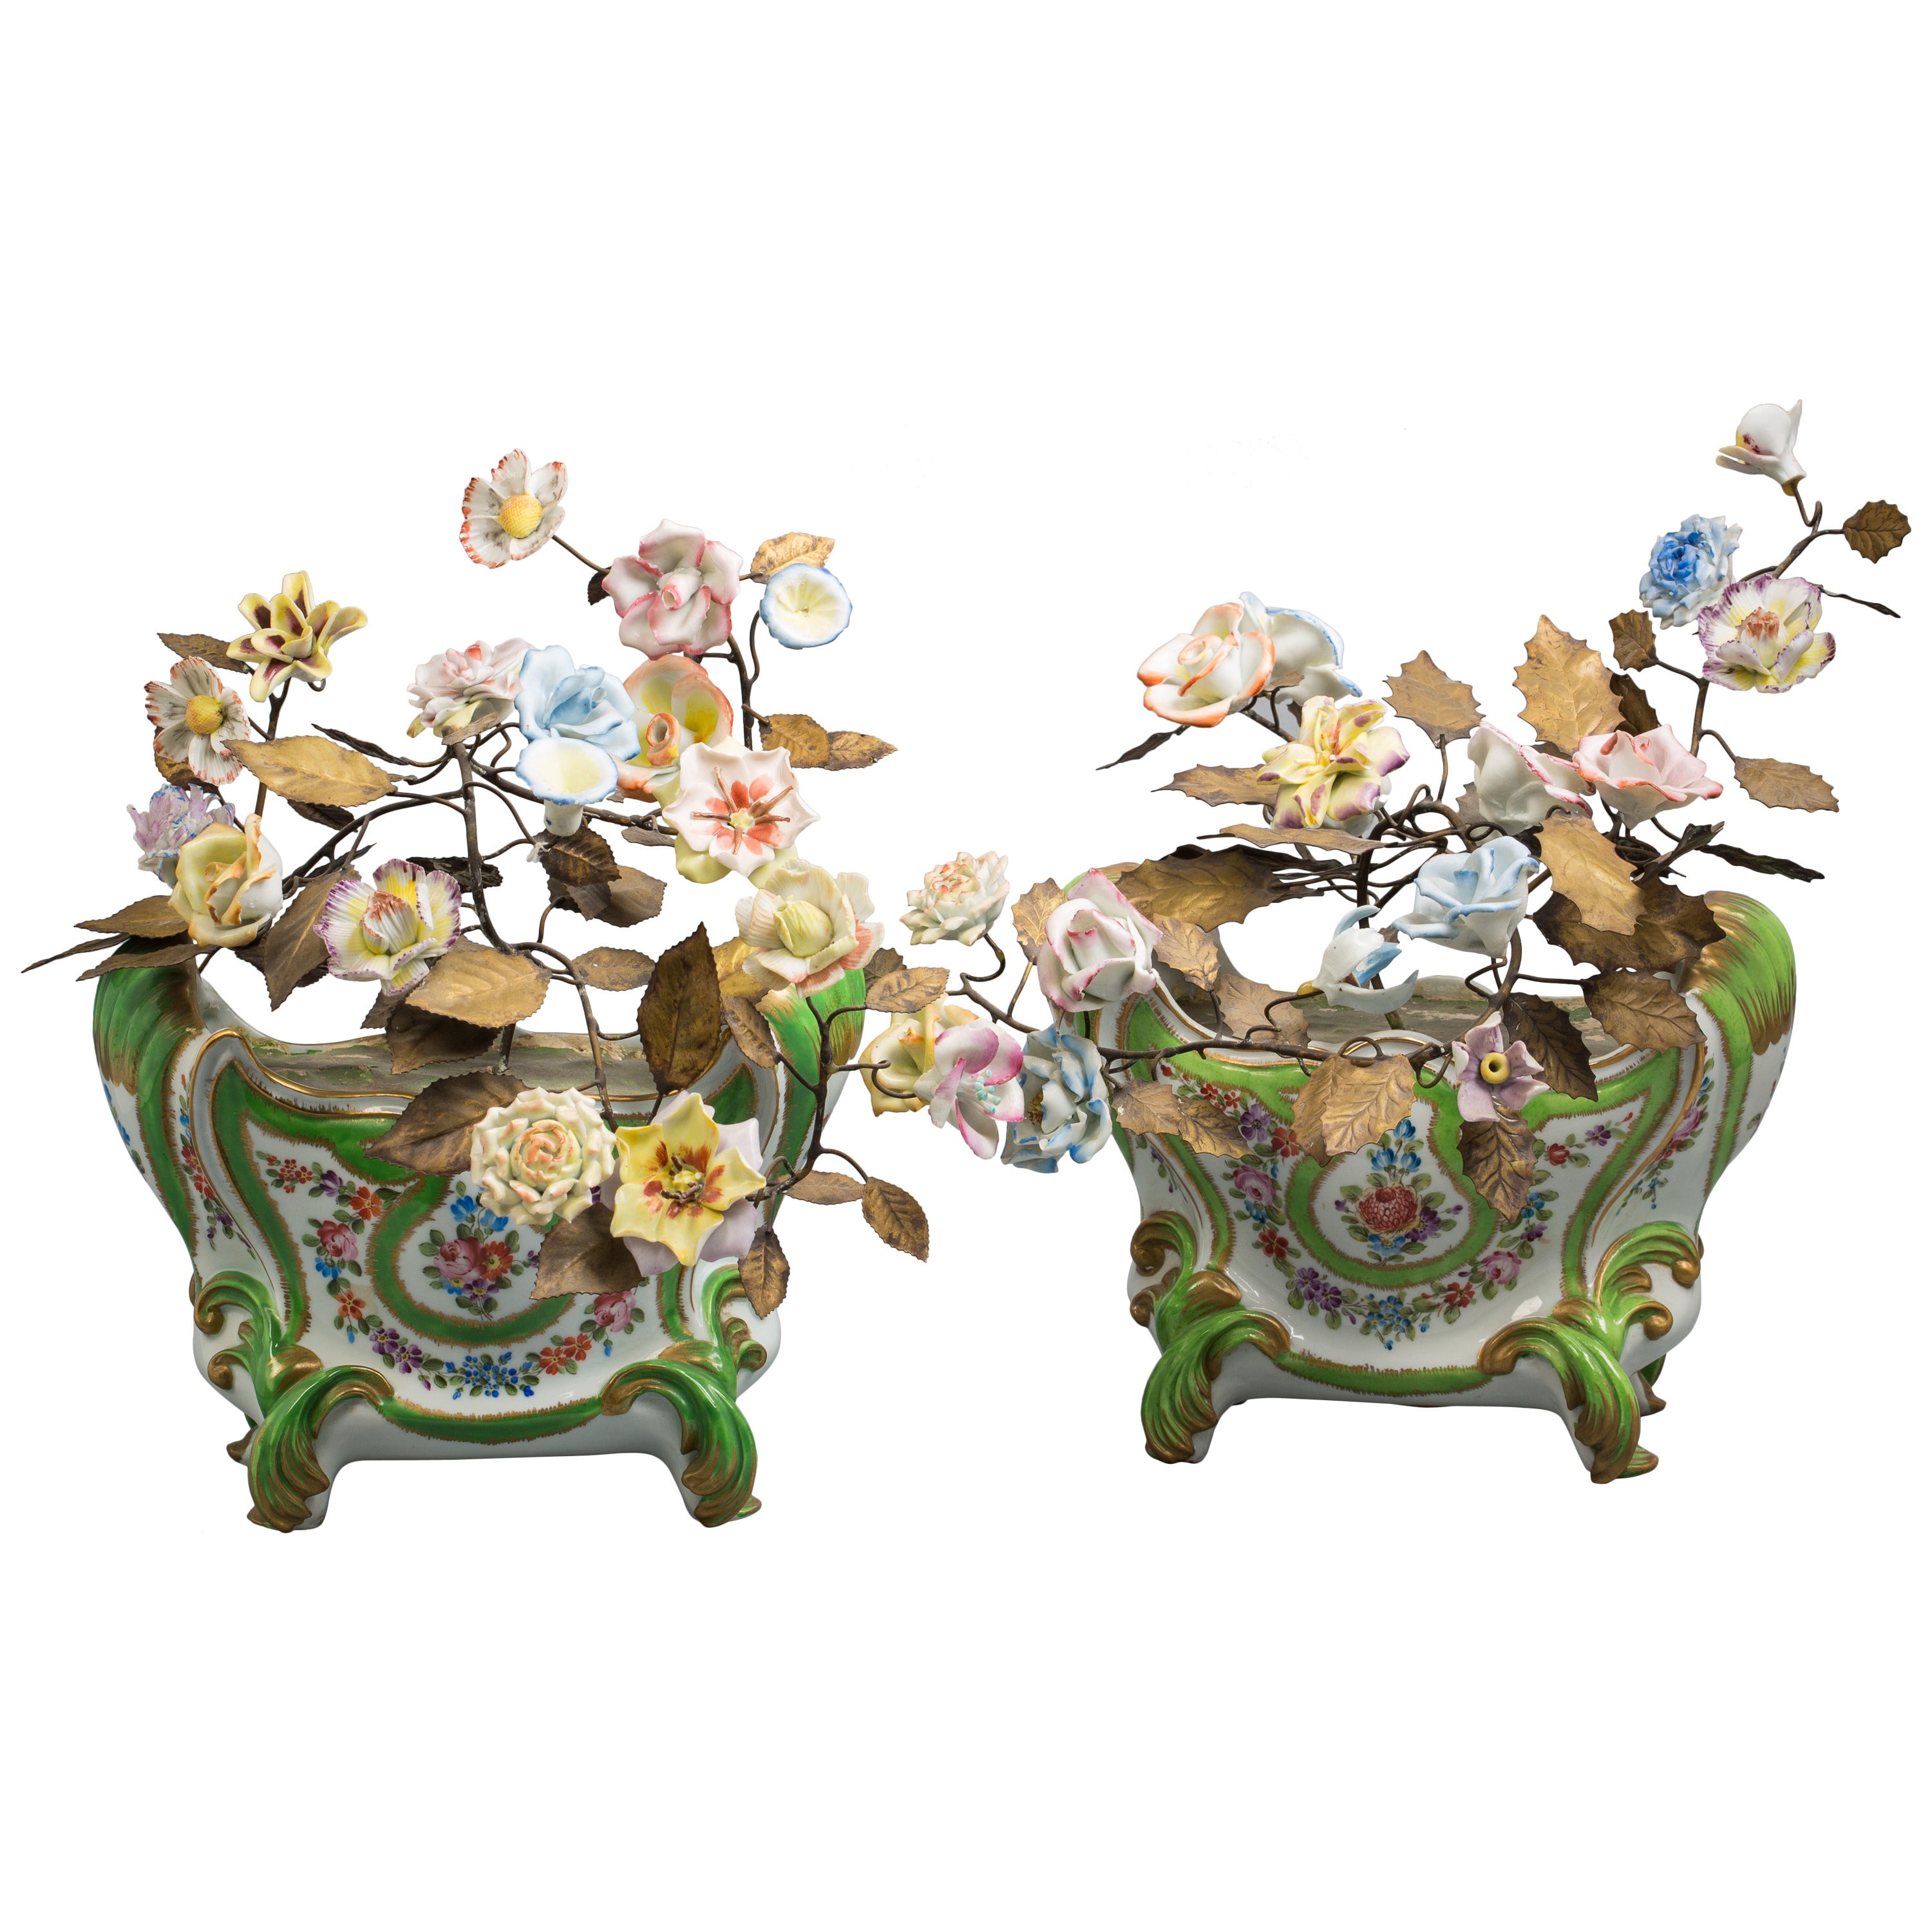 Pair of French Porcelain Cachepots, circa 1860